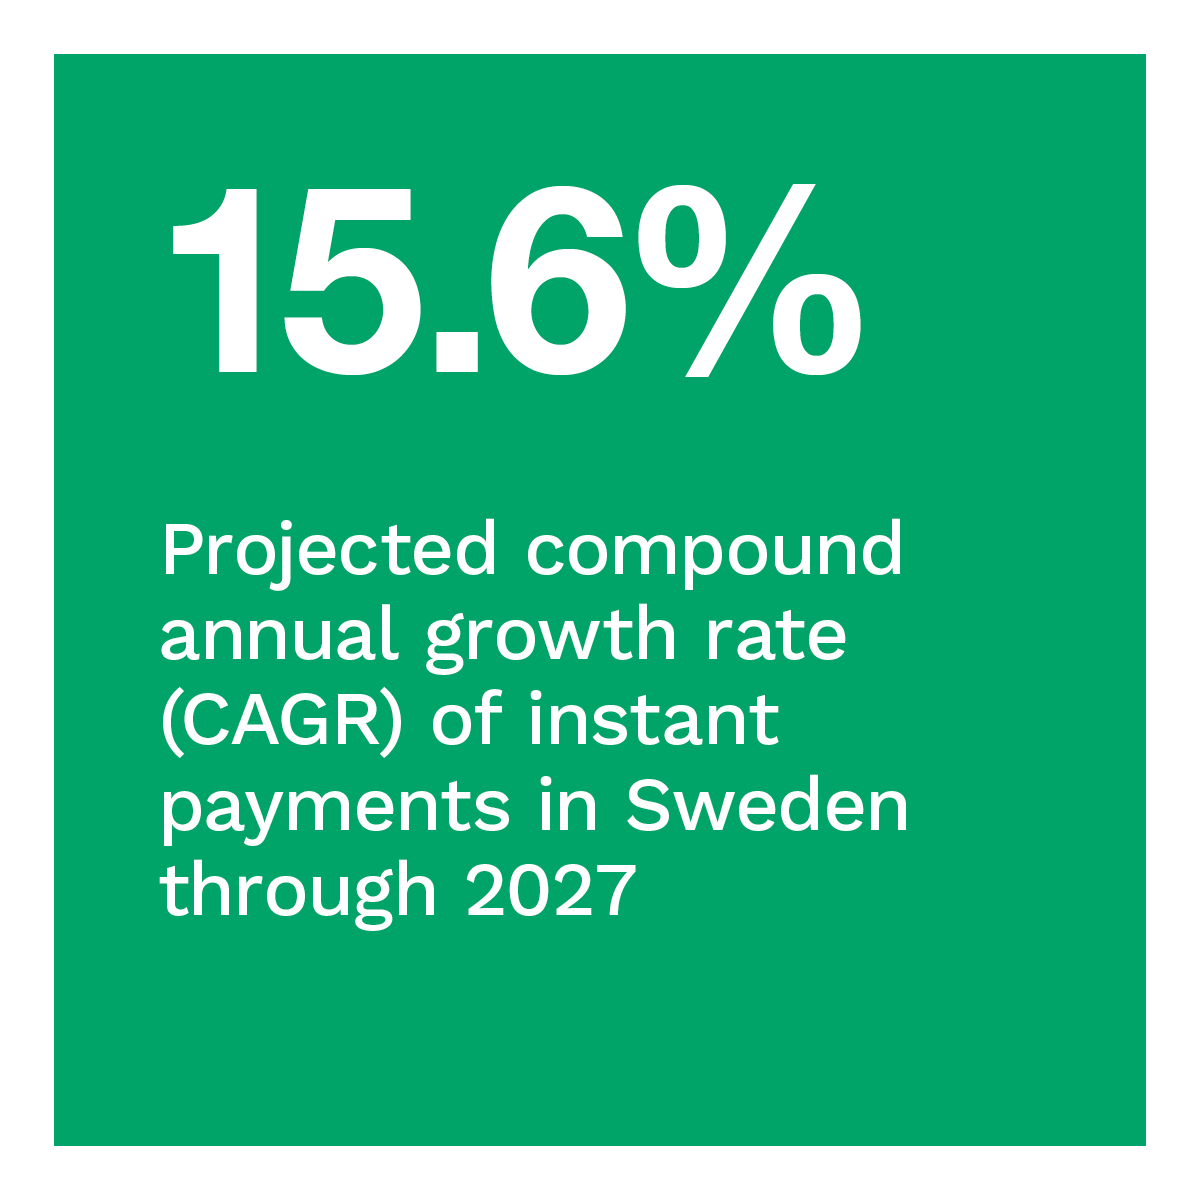 15.6%: Projected compound annual growth rate (CAGR) of instant payments in Sweden through 2027